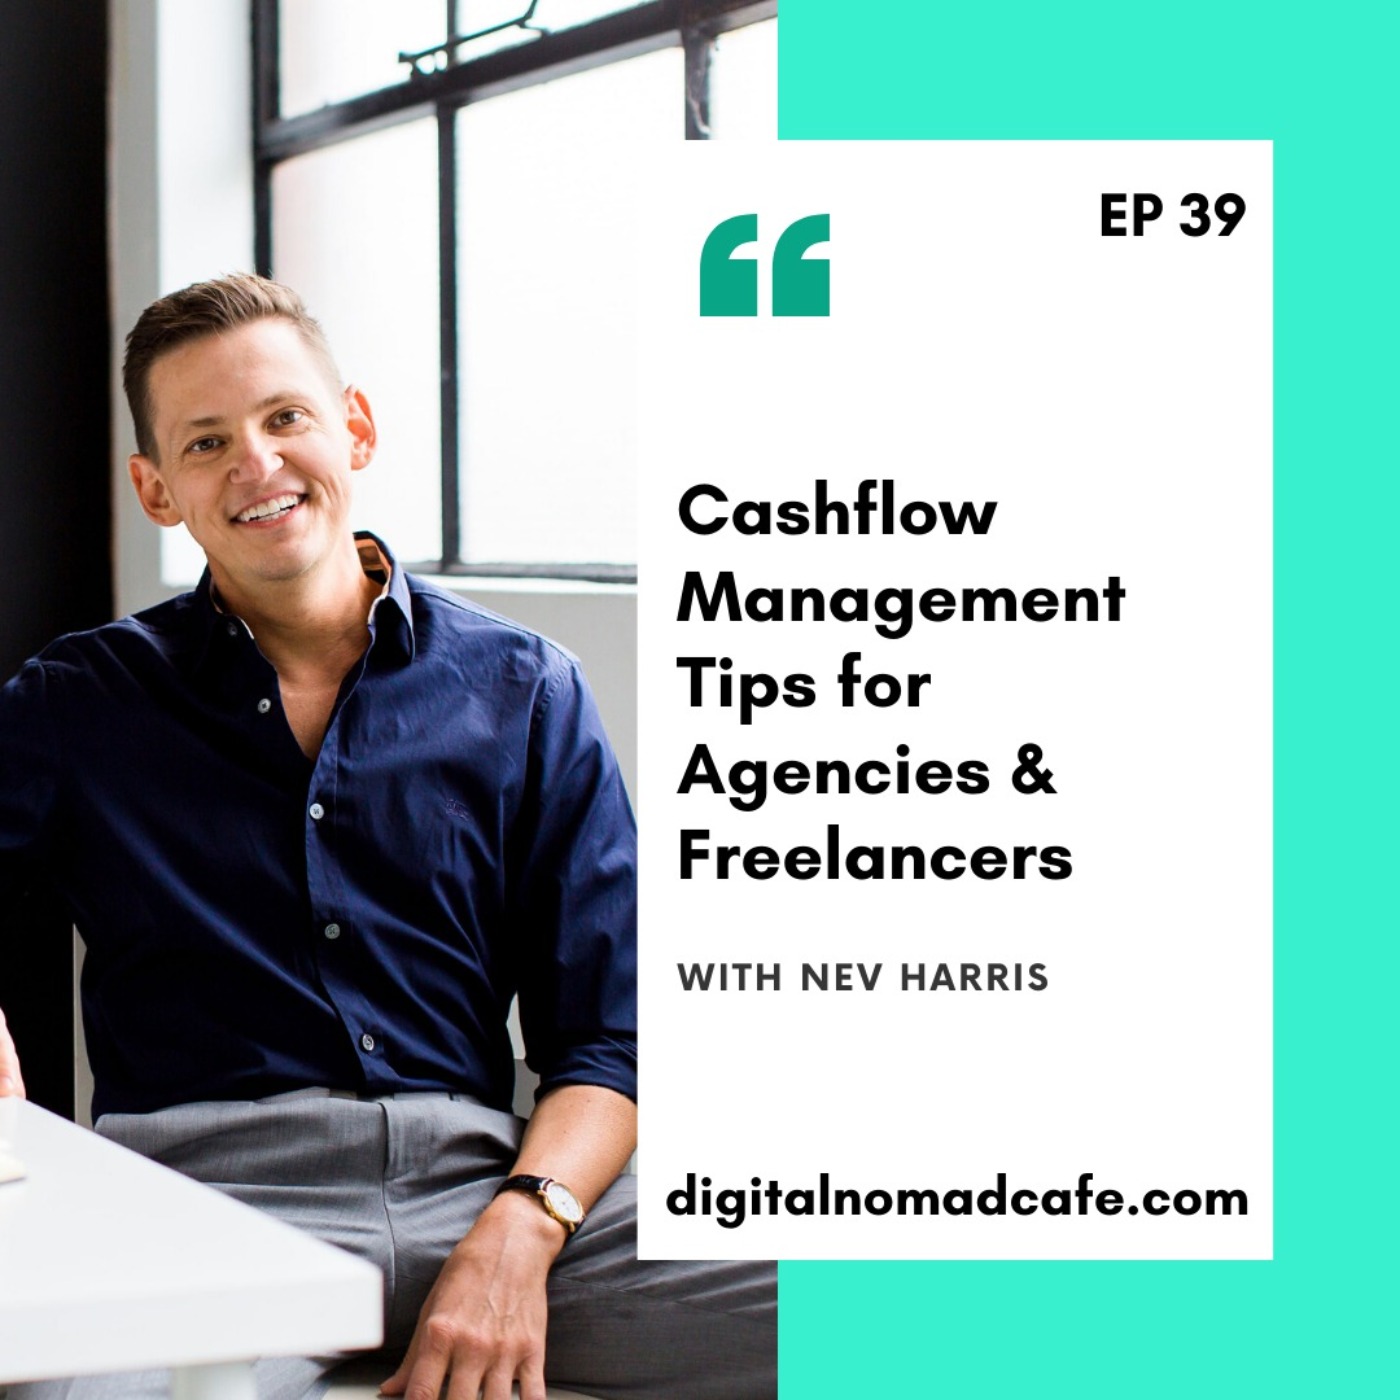 EP39:Cashflow Management Tips for Agencies & Freelancers with Nev Harris